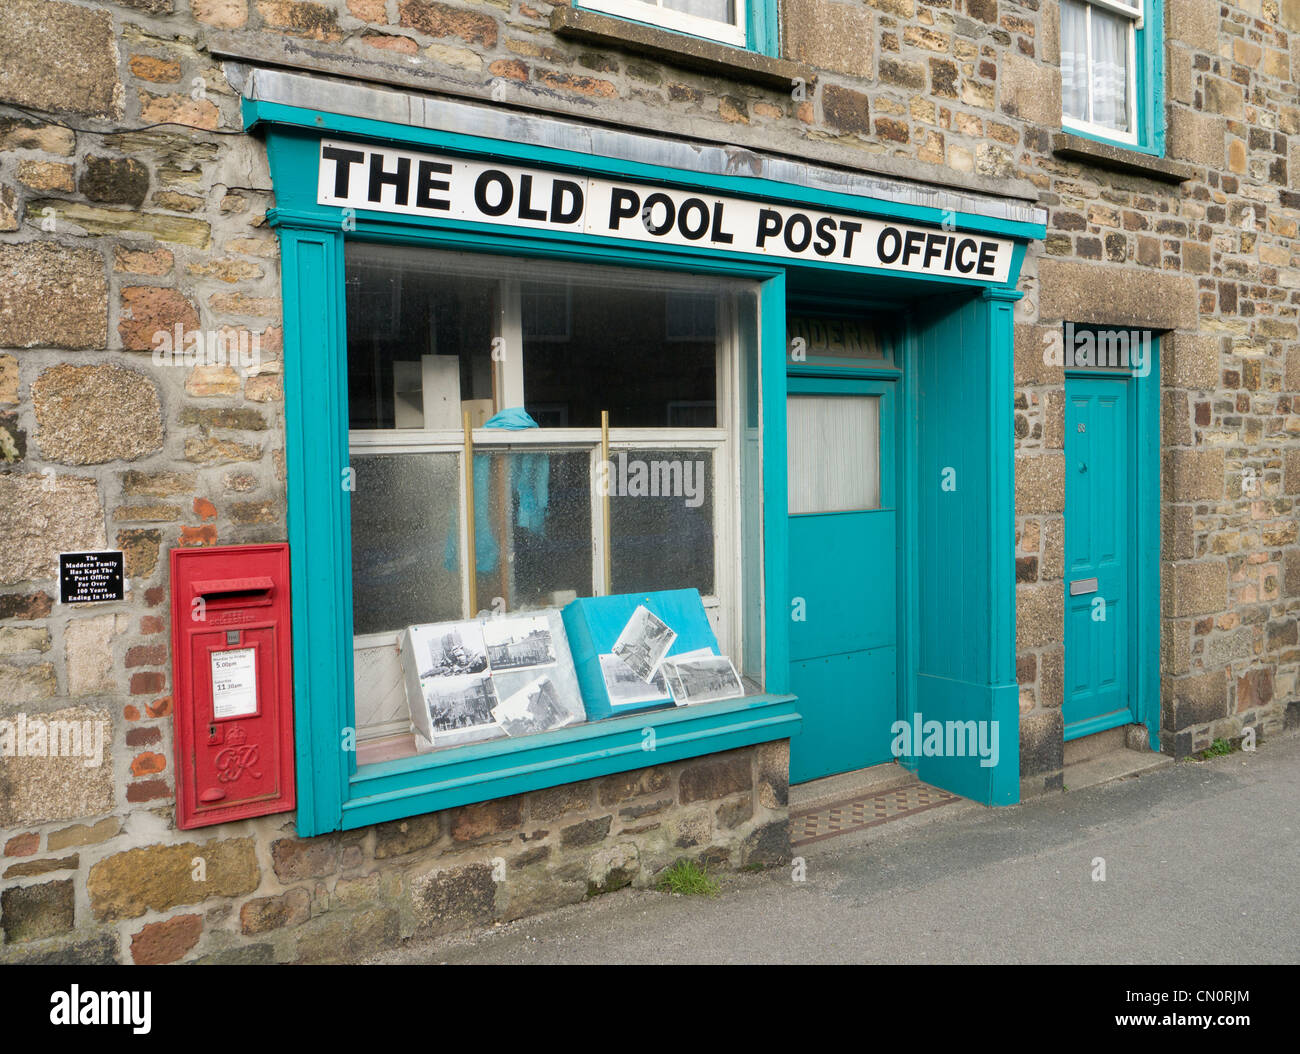 The Old Pool Post Office in Cornwall UK. Stock Photo